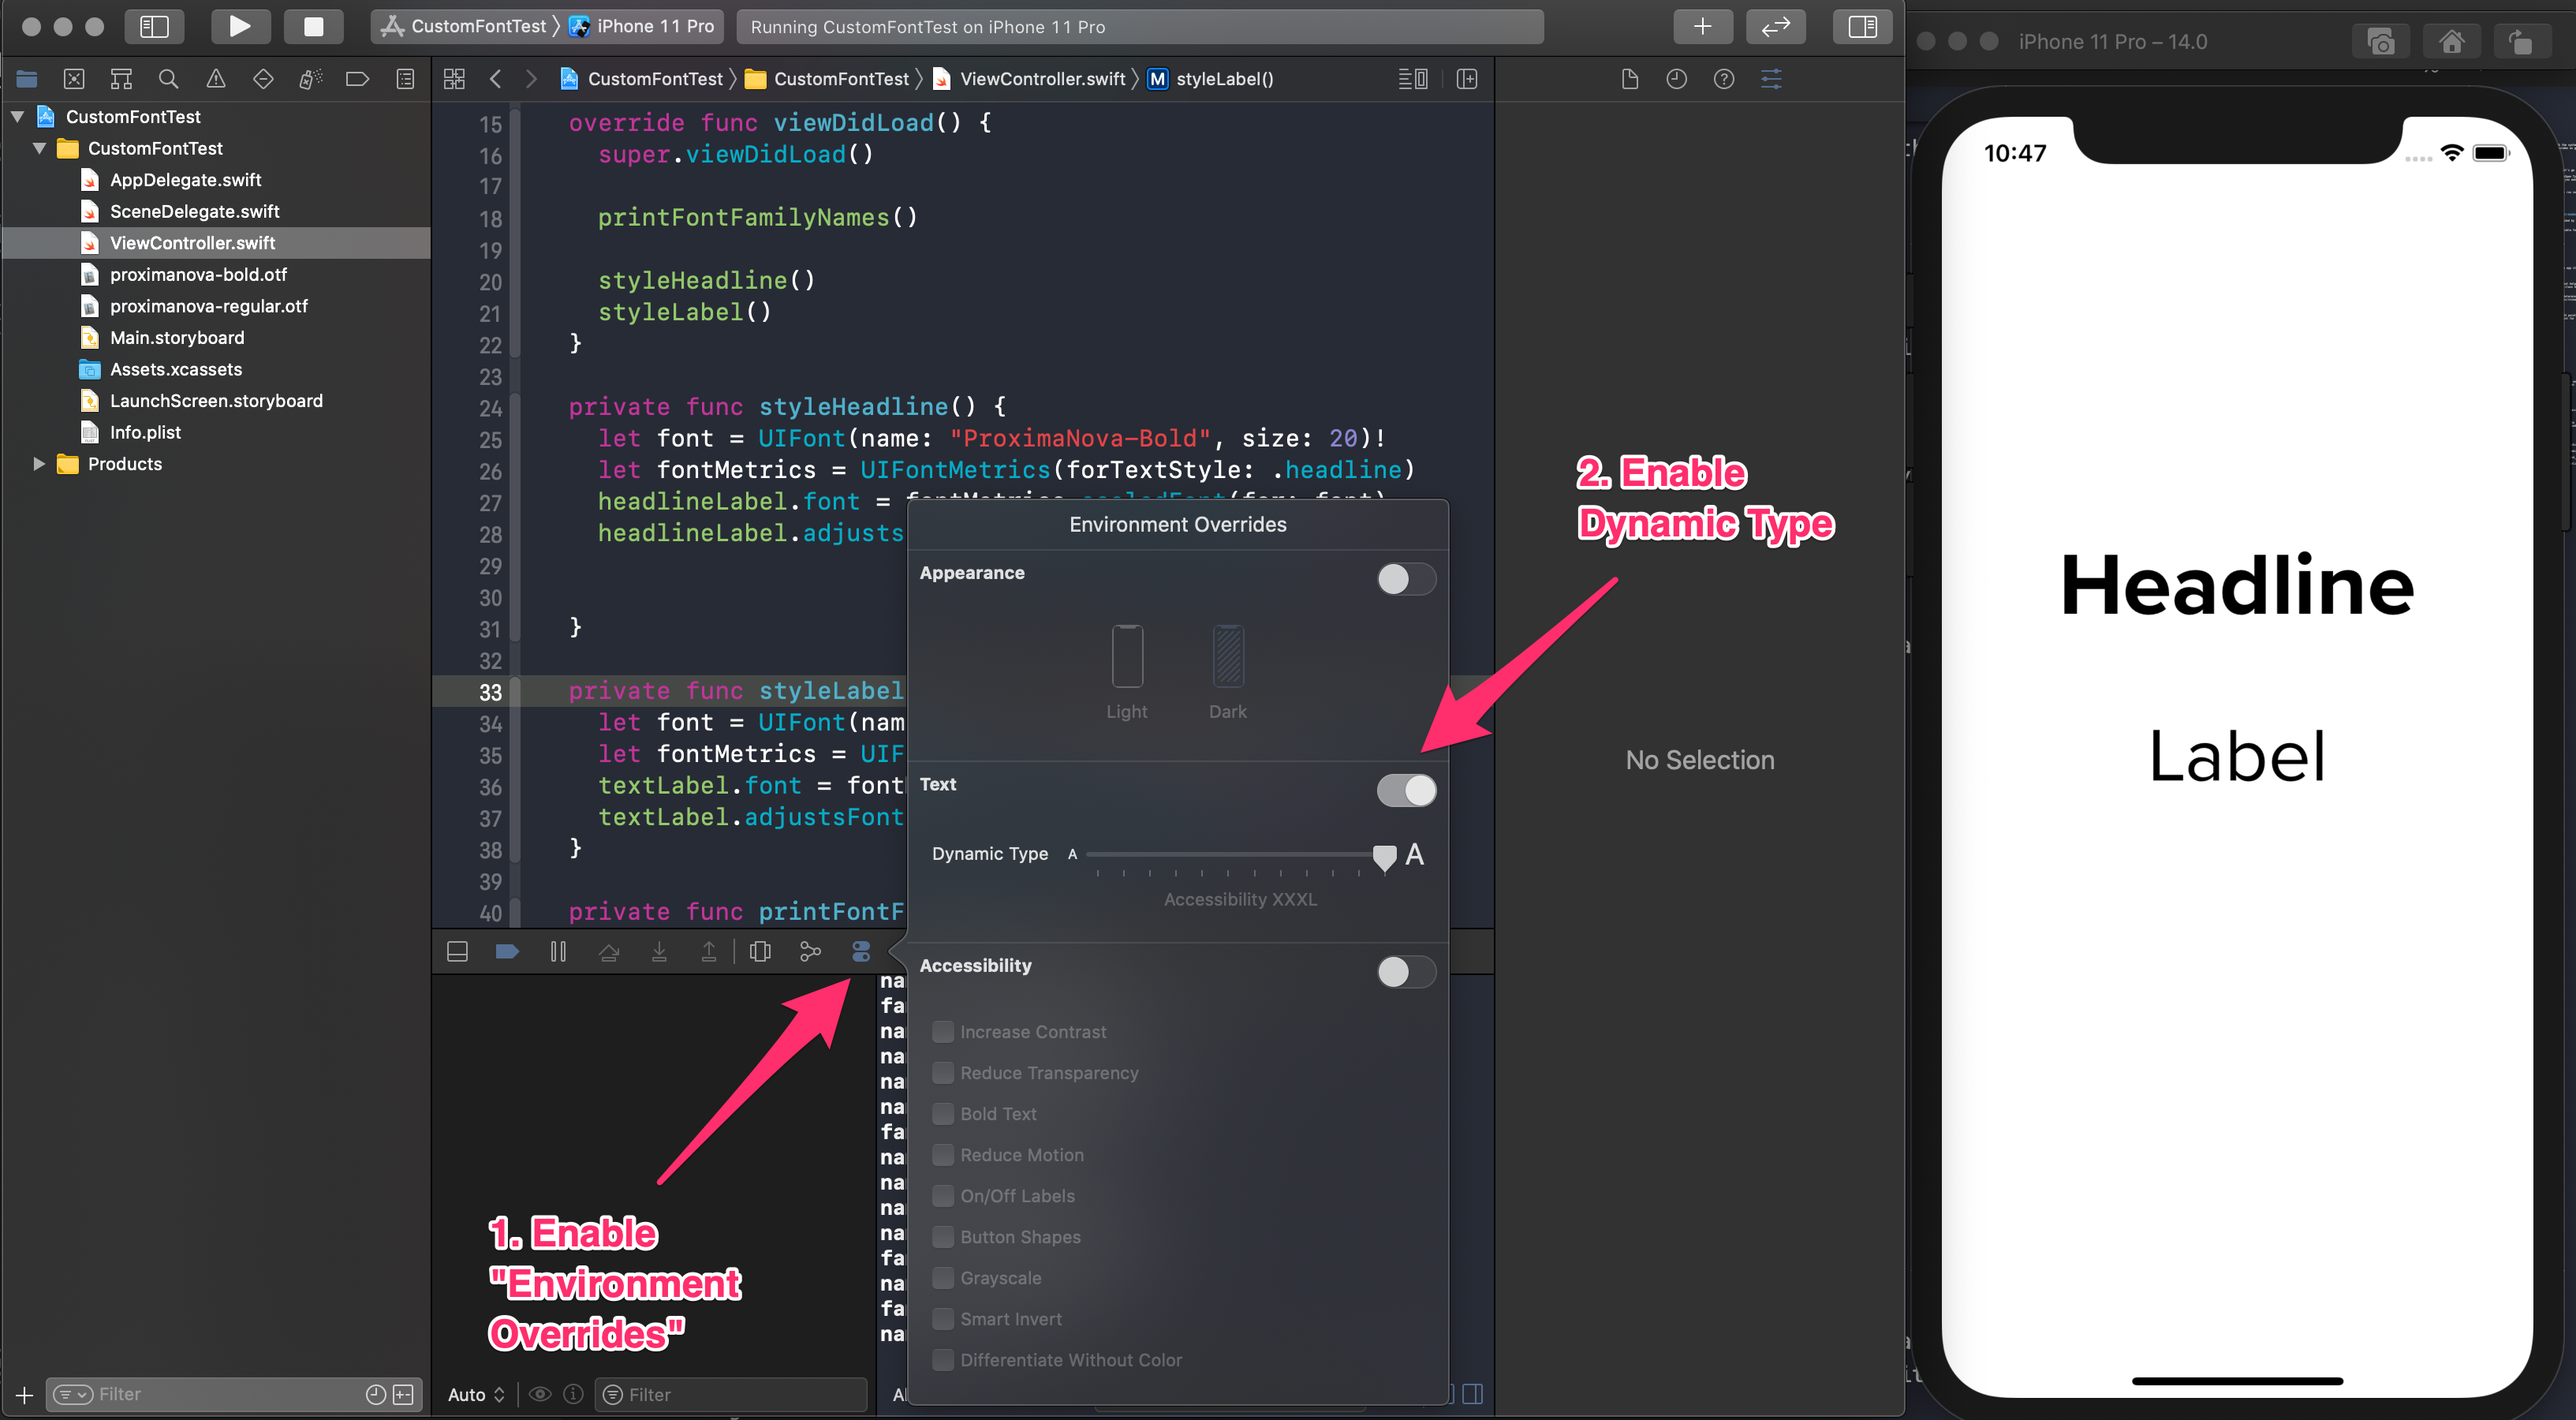 Enable Dynamic Type in Xcode Environment OVerrides